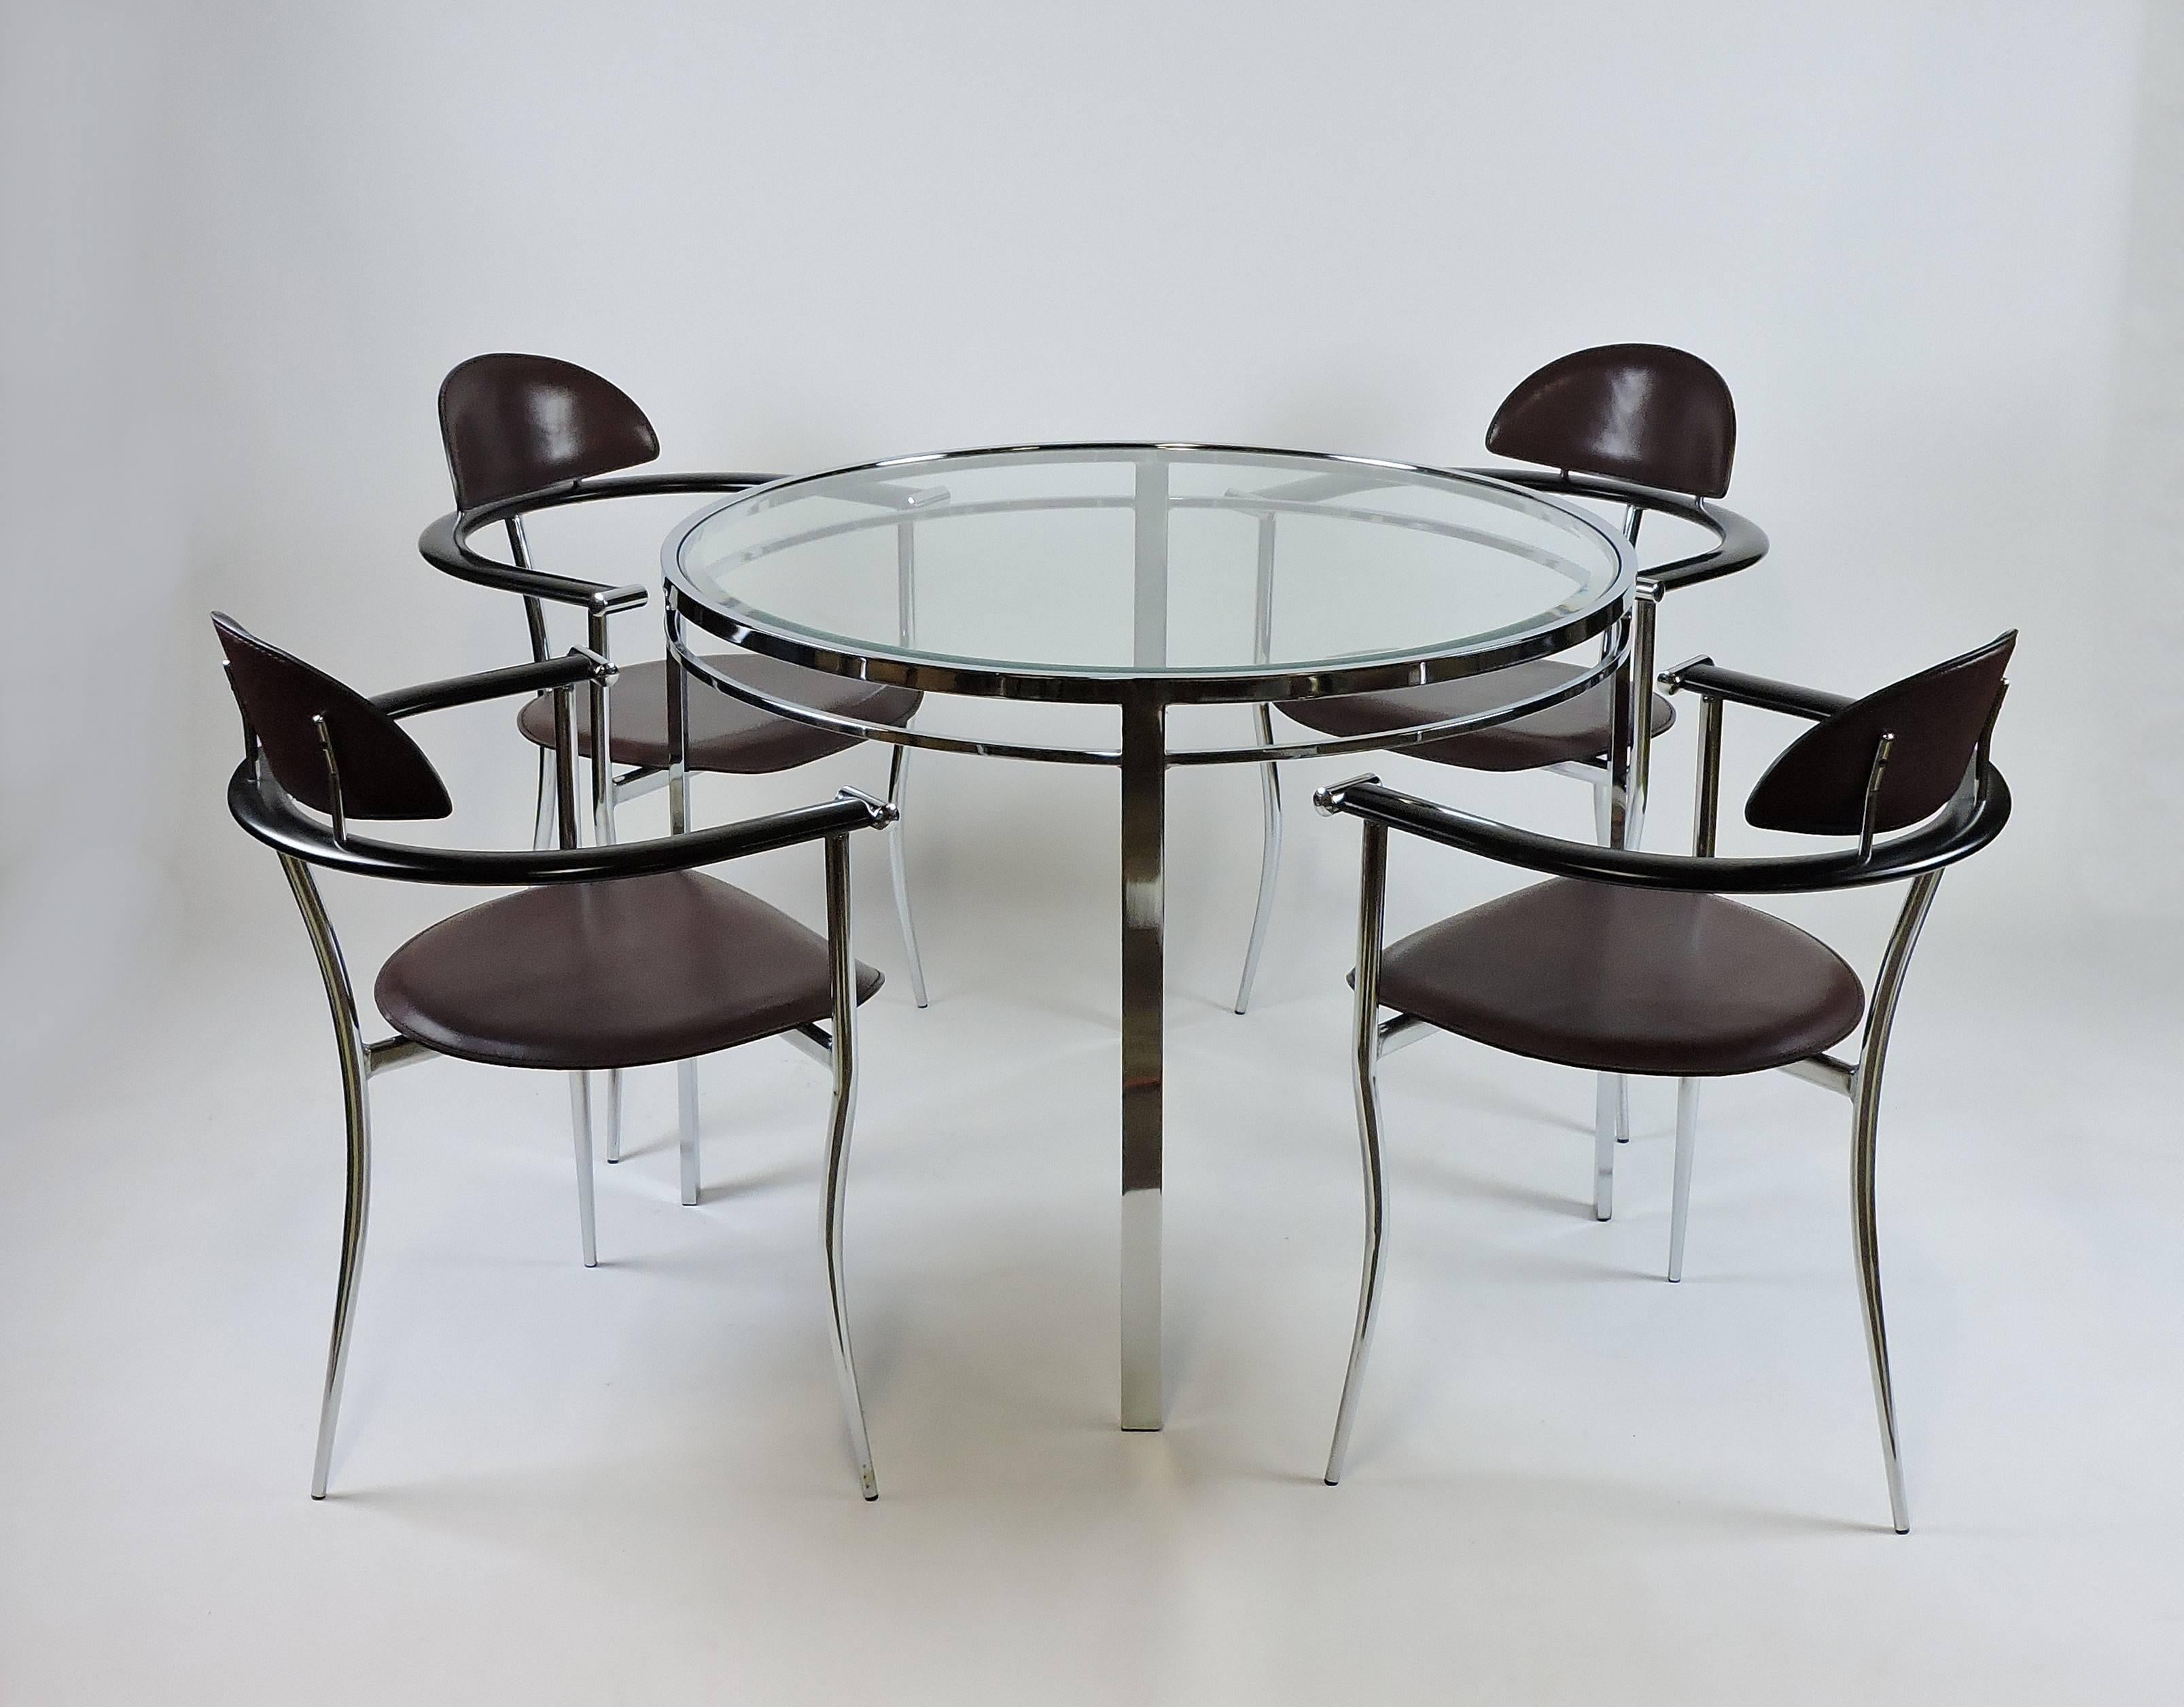 Late 20th Century Chrome and Glass Mid-Century Modern Round Dining Table